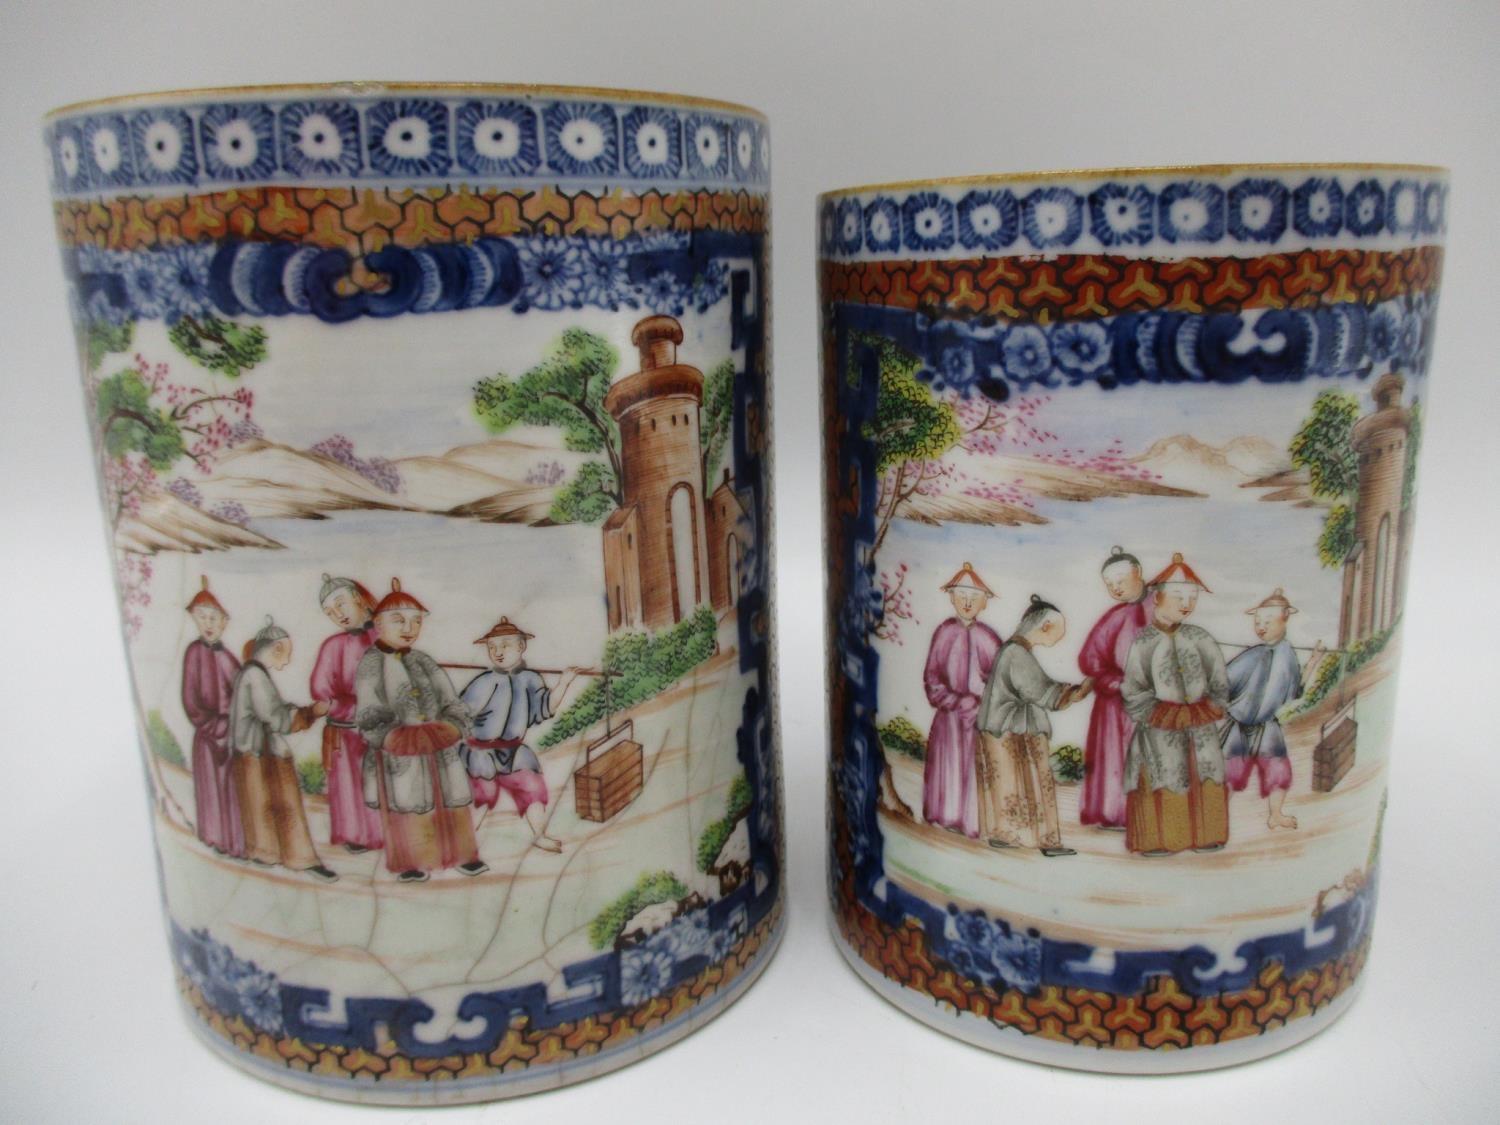 Two similar late 18th century Chinese Qing Dynasty export tankards, decorated with a panel of - Image 5 of 6